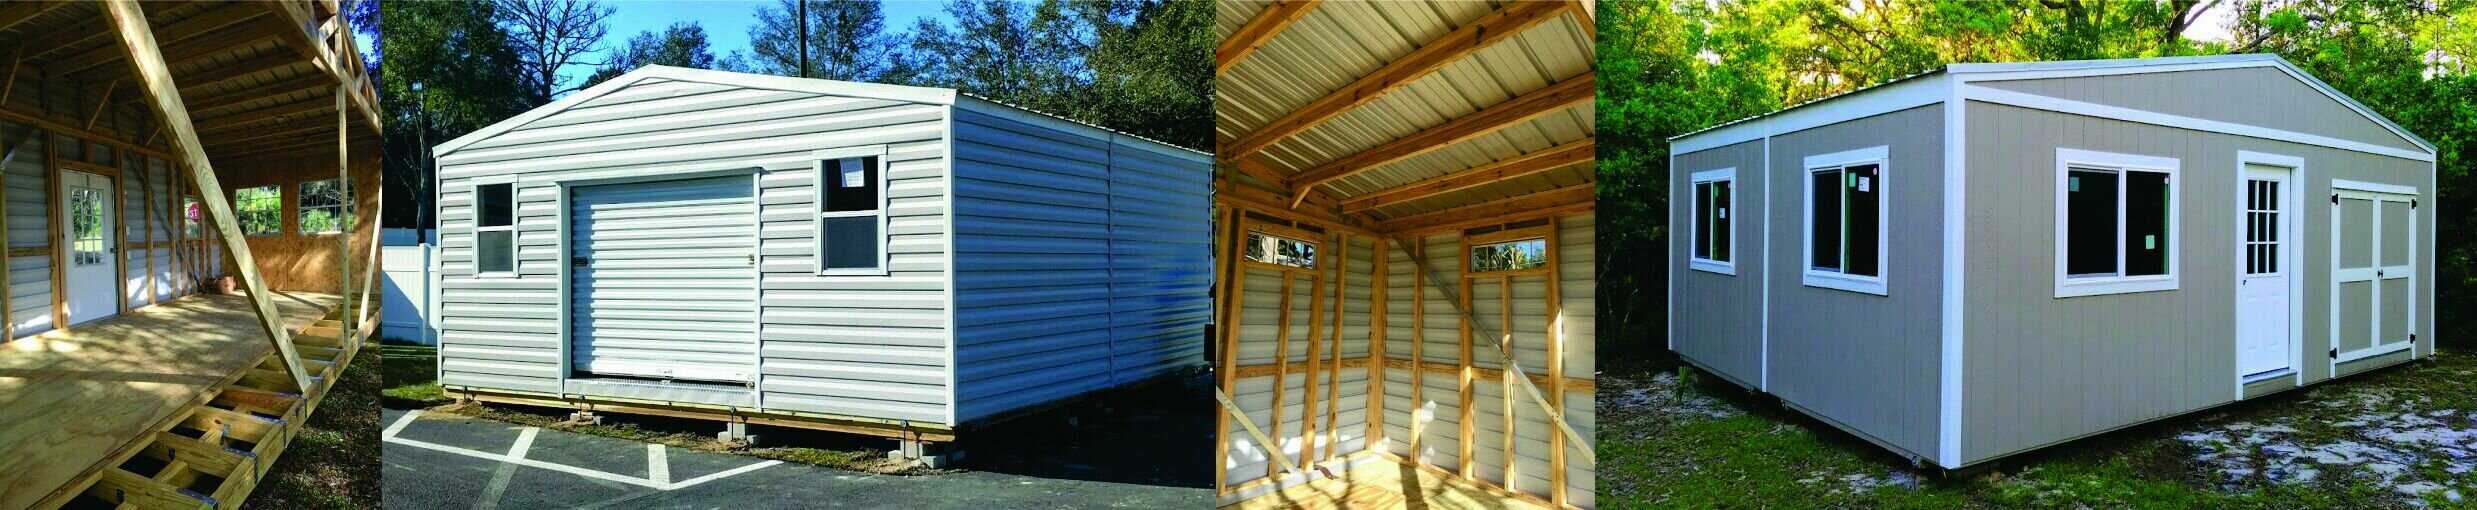 multi module shed for sale cover photo